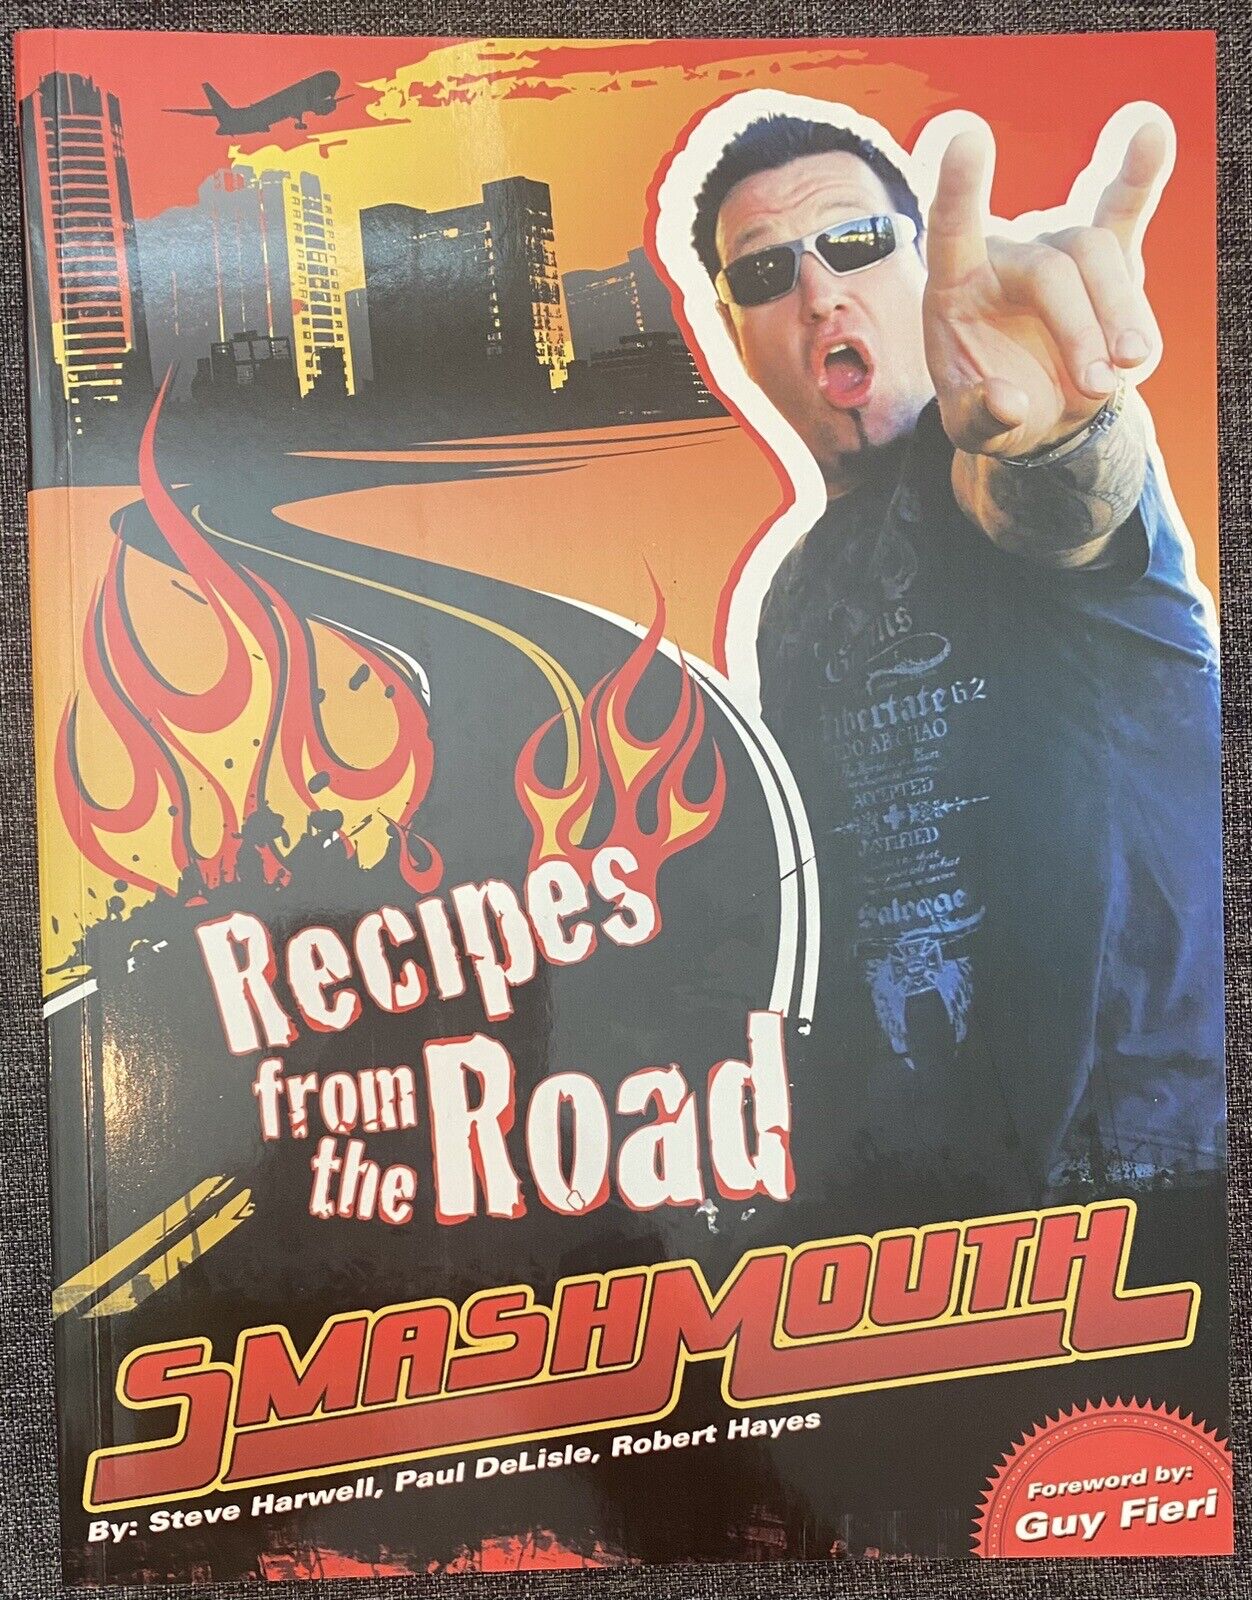 Smash Mouth Recipes from the Road SIGNED book Steve Harwell, DeLisle, Hayes AUTO